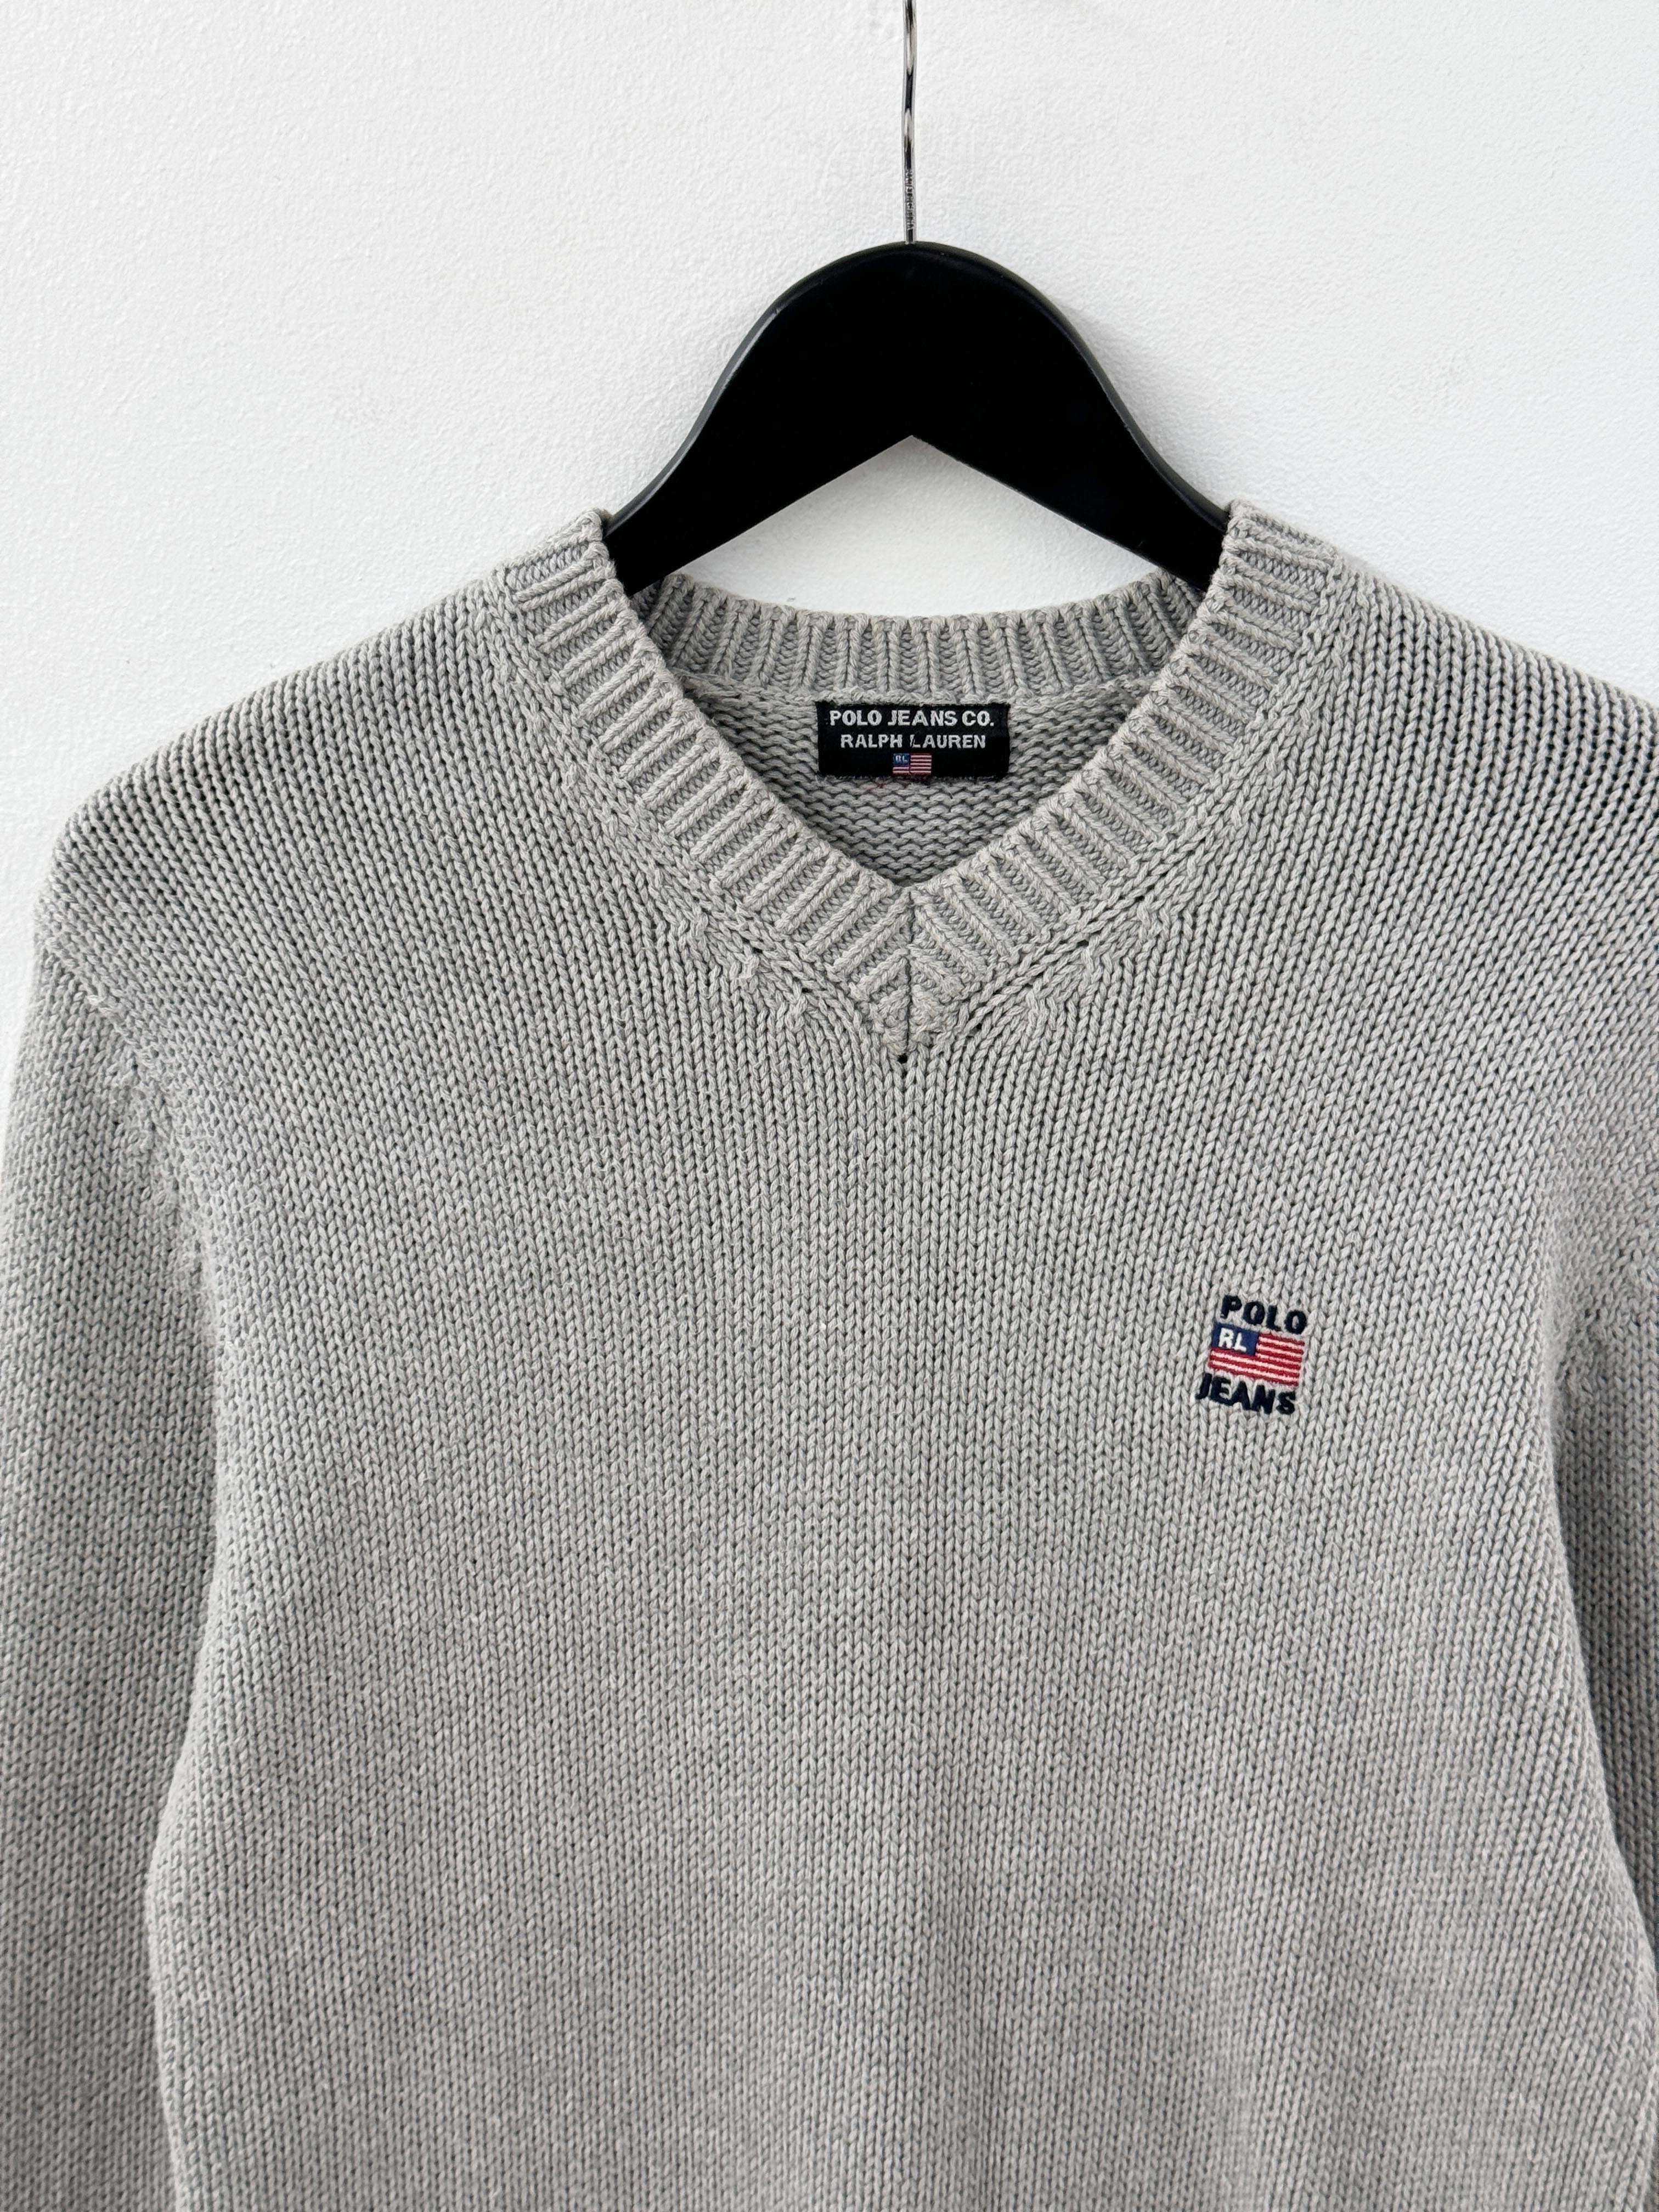 Polo Jeans cotton sweater